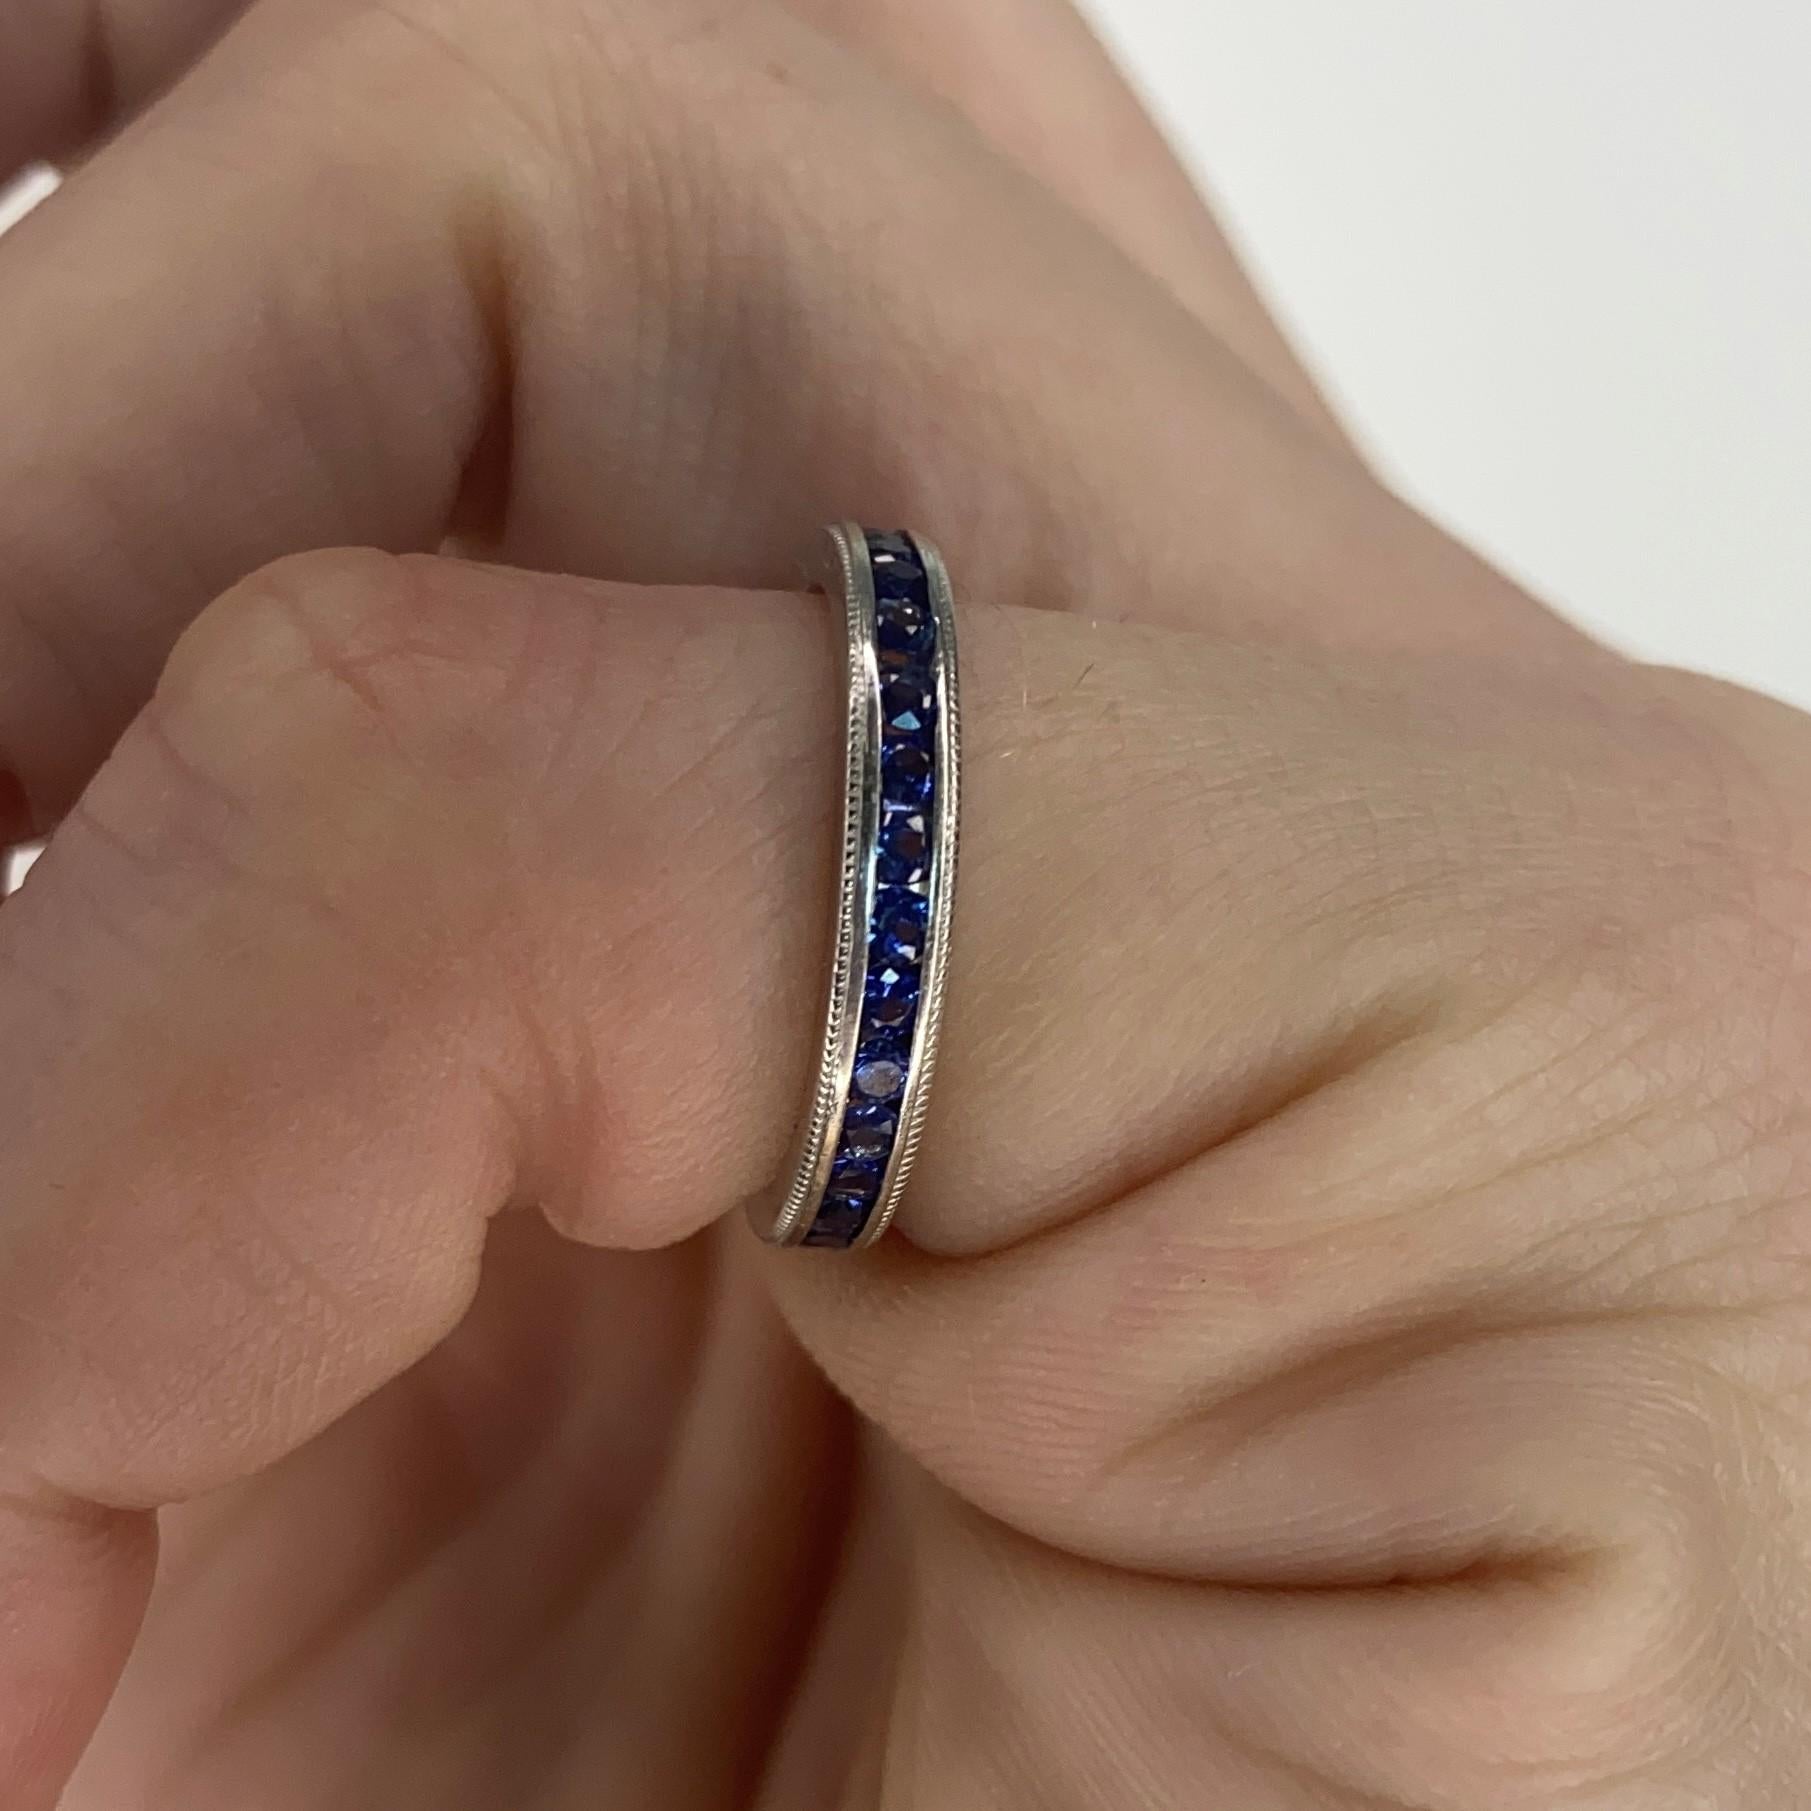 An eternity ring band with natural sapphires.

Contemporary eternity band ring crafted in America in solid white gold of 18 karats with high polished finish. It is mounted in a plain channel setting with 30 calibrated round brilliant cuts of blue